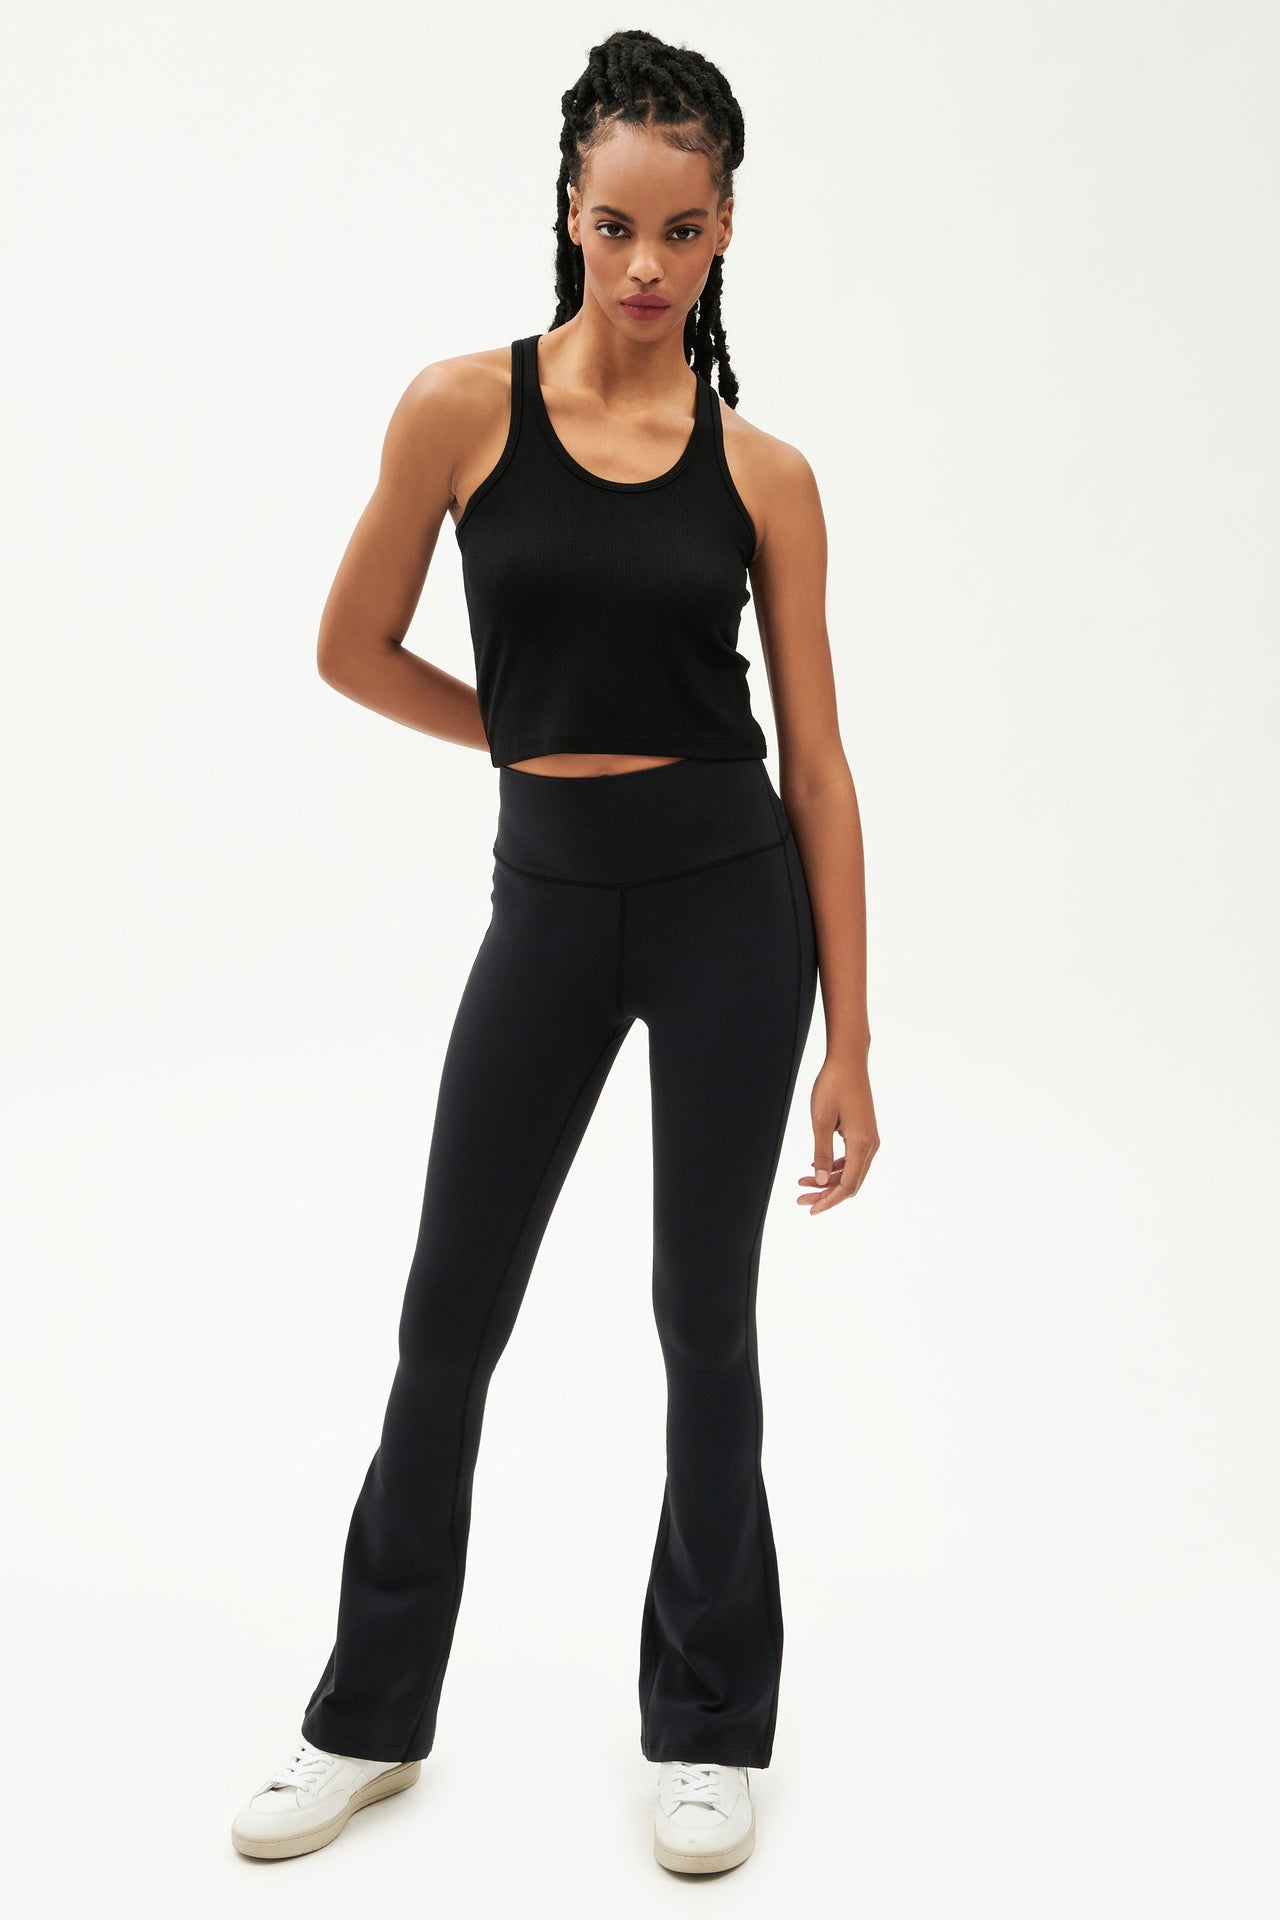 Front view of girl wearing a ribbed black cropped tank top and black flared leggings with white shoes